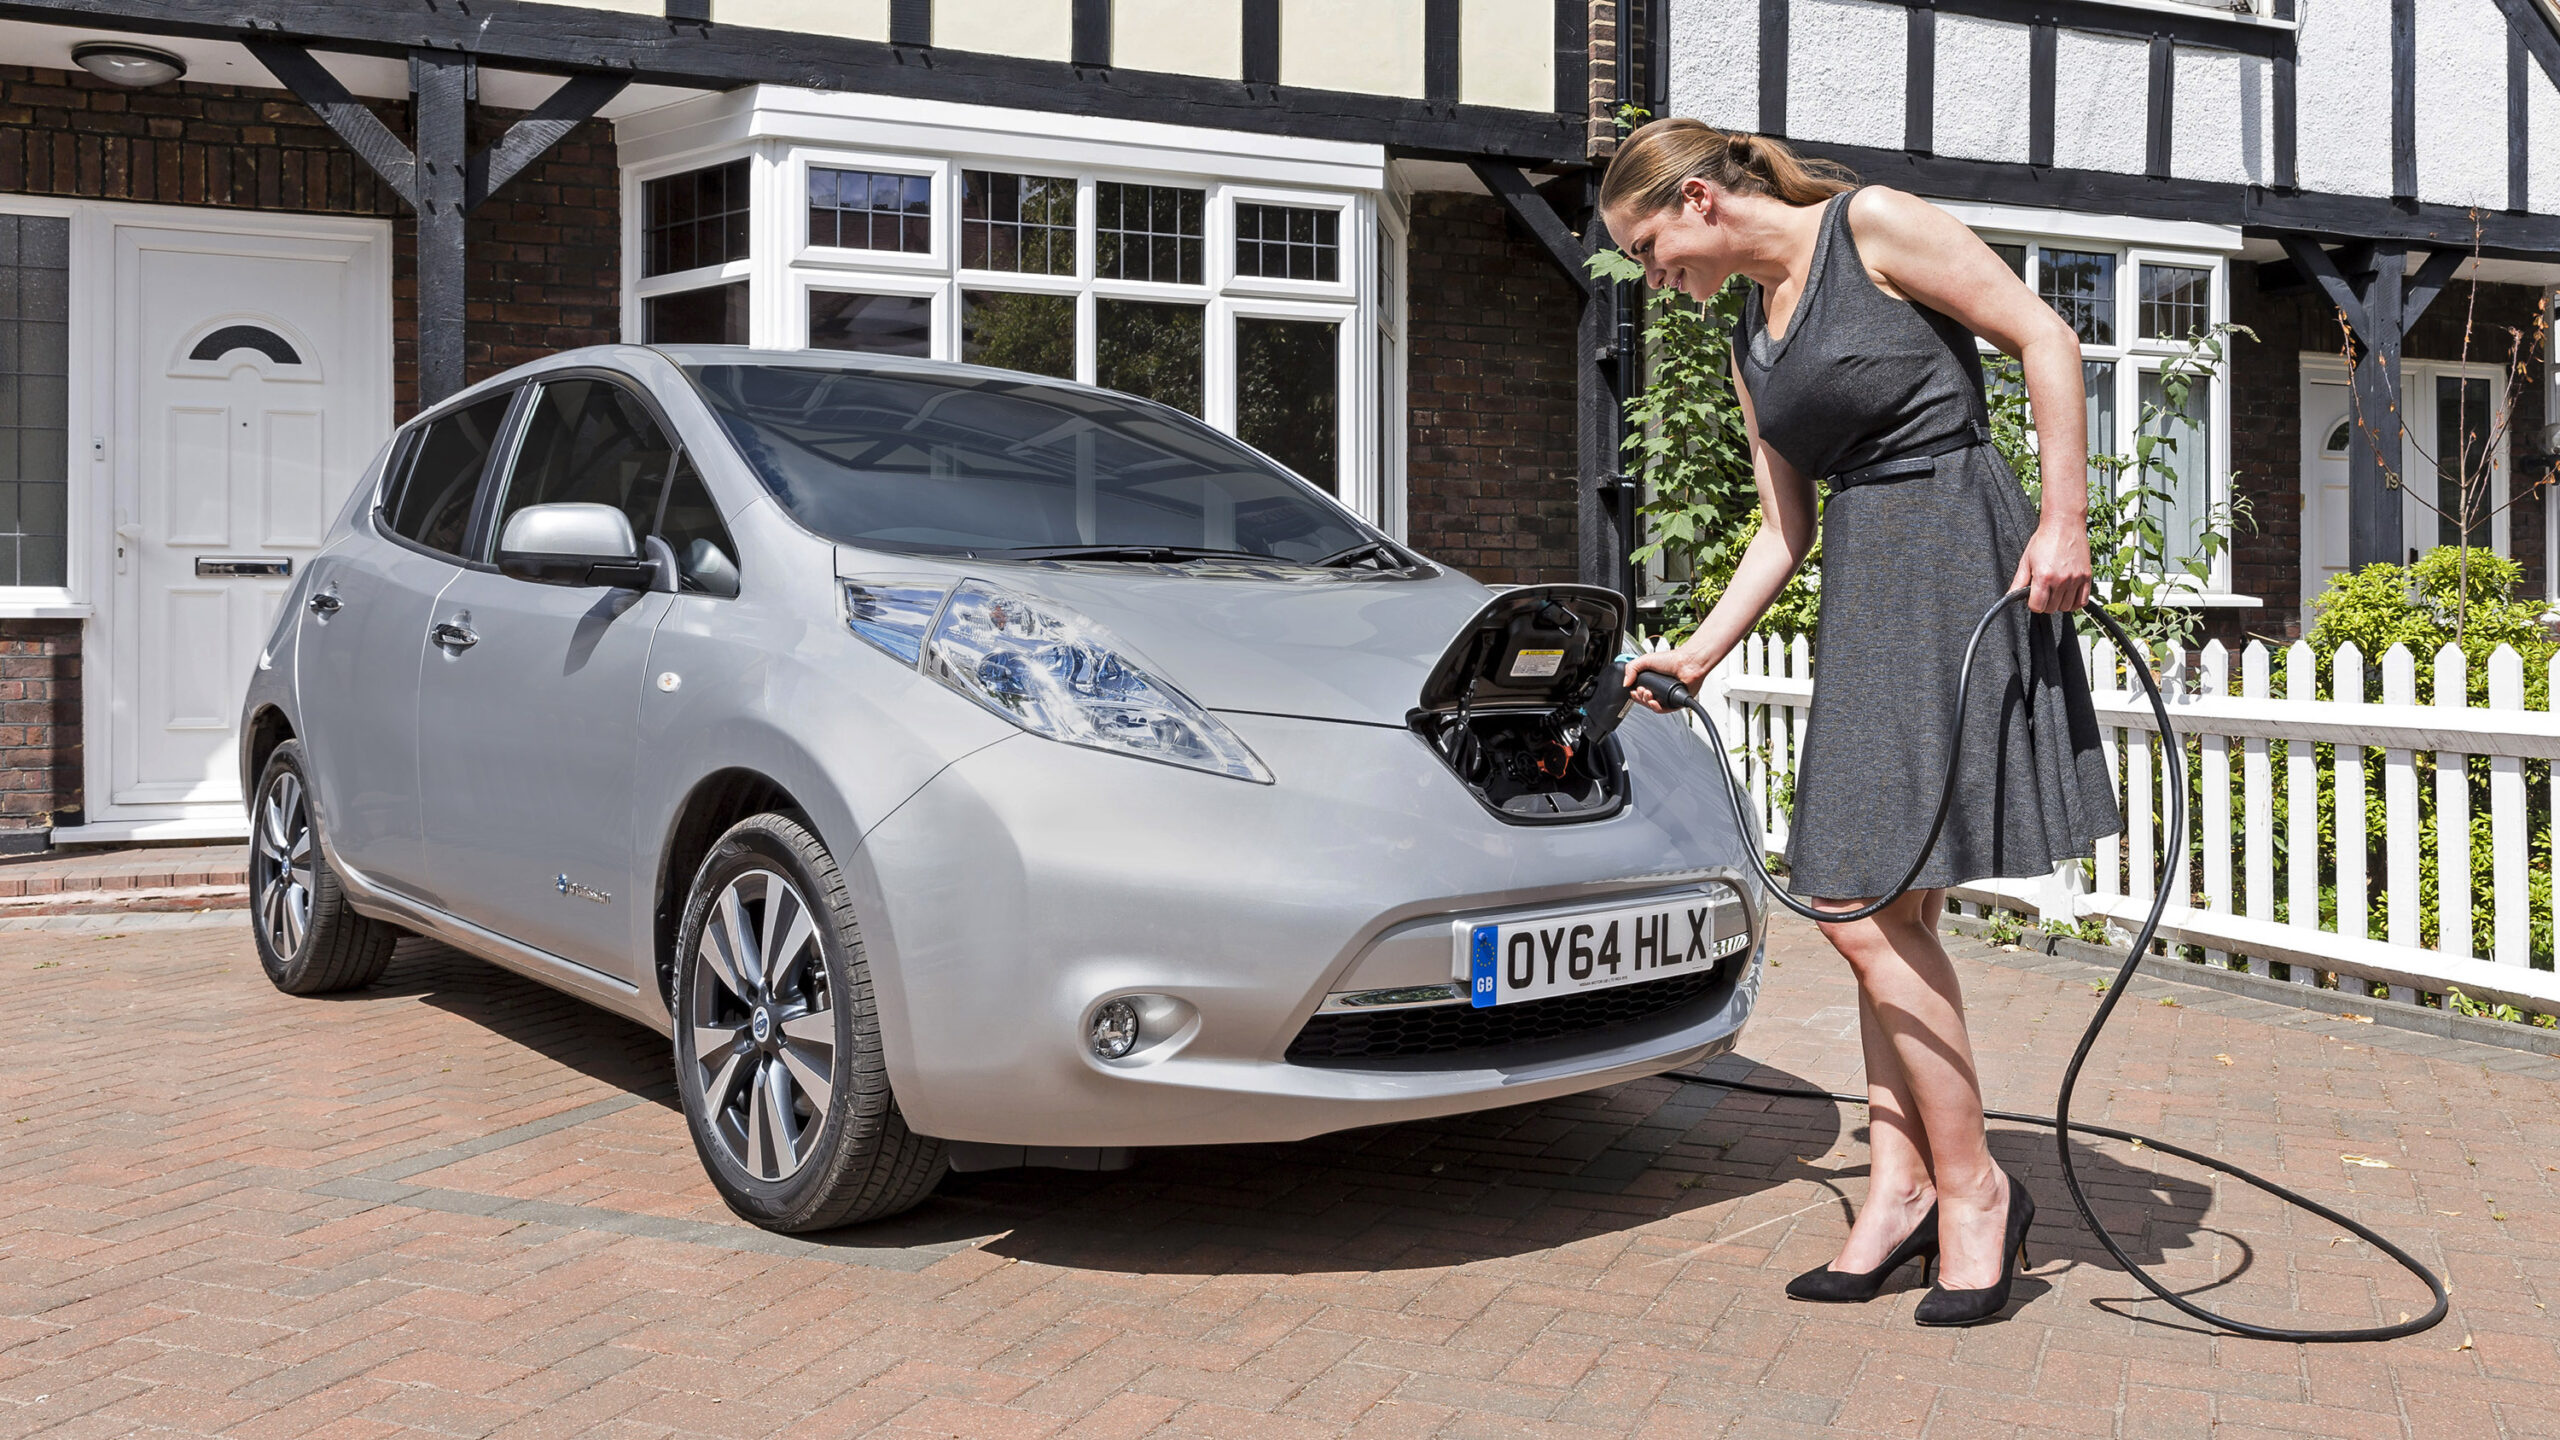 5 reasons to try electric car leasing - Auto Mechanic
